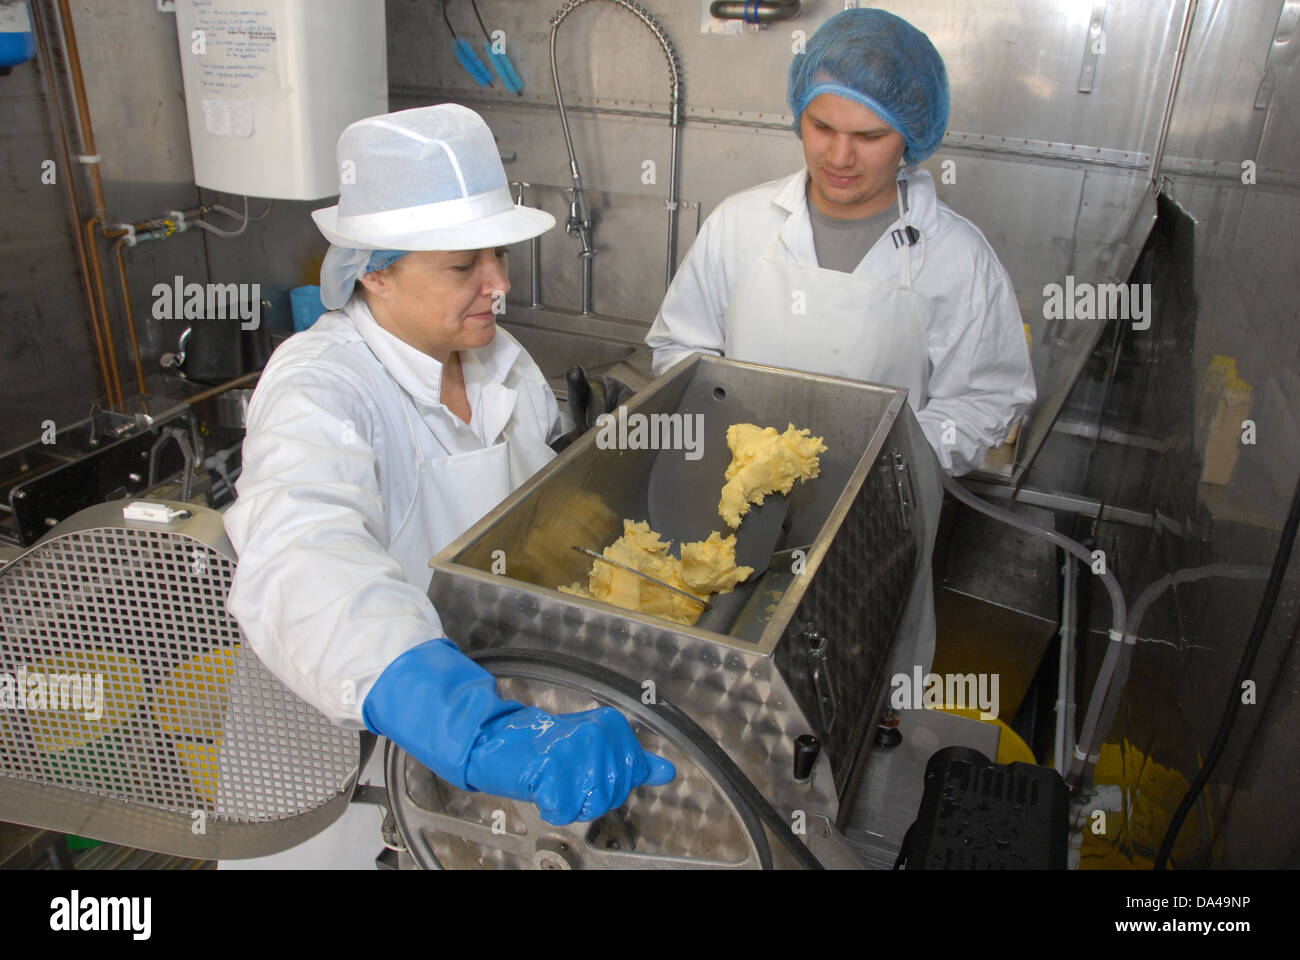 Workers using churn making organically made butter from unpasteurized milk on organic dairy farm Hook and Son Longleys Farm Stock Photo